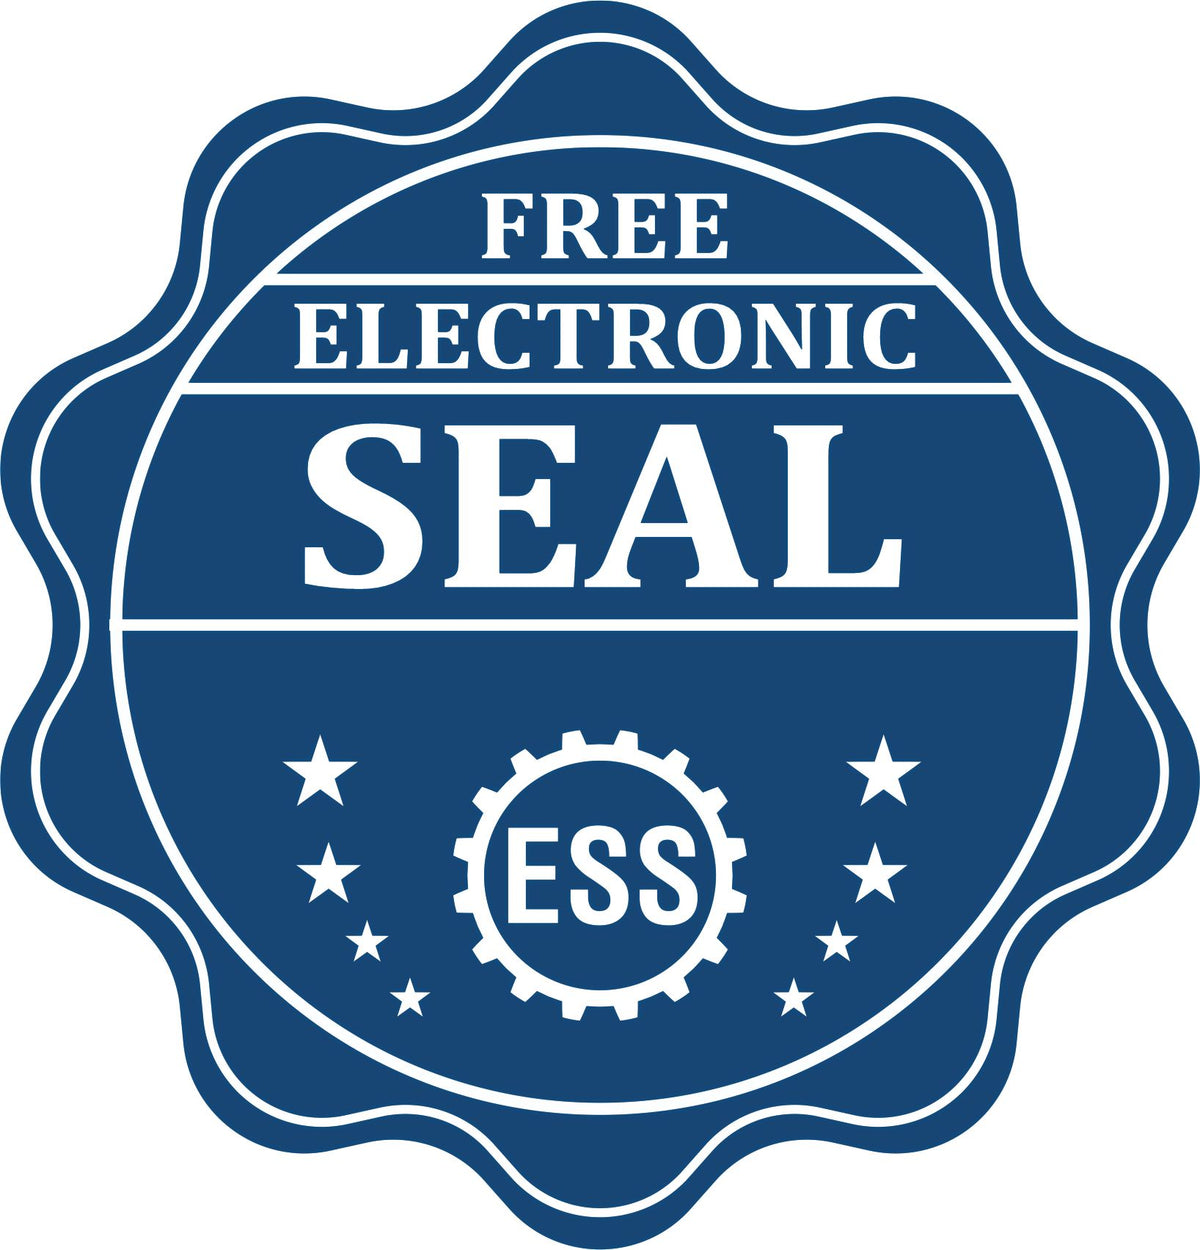 A badge showing a free electronic seal for the State of Missouri Extended Long Reach Geologist Seal with stars and the ESS gear on the emblem.